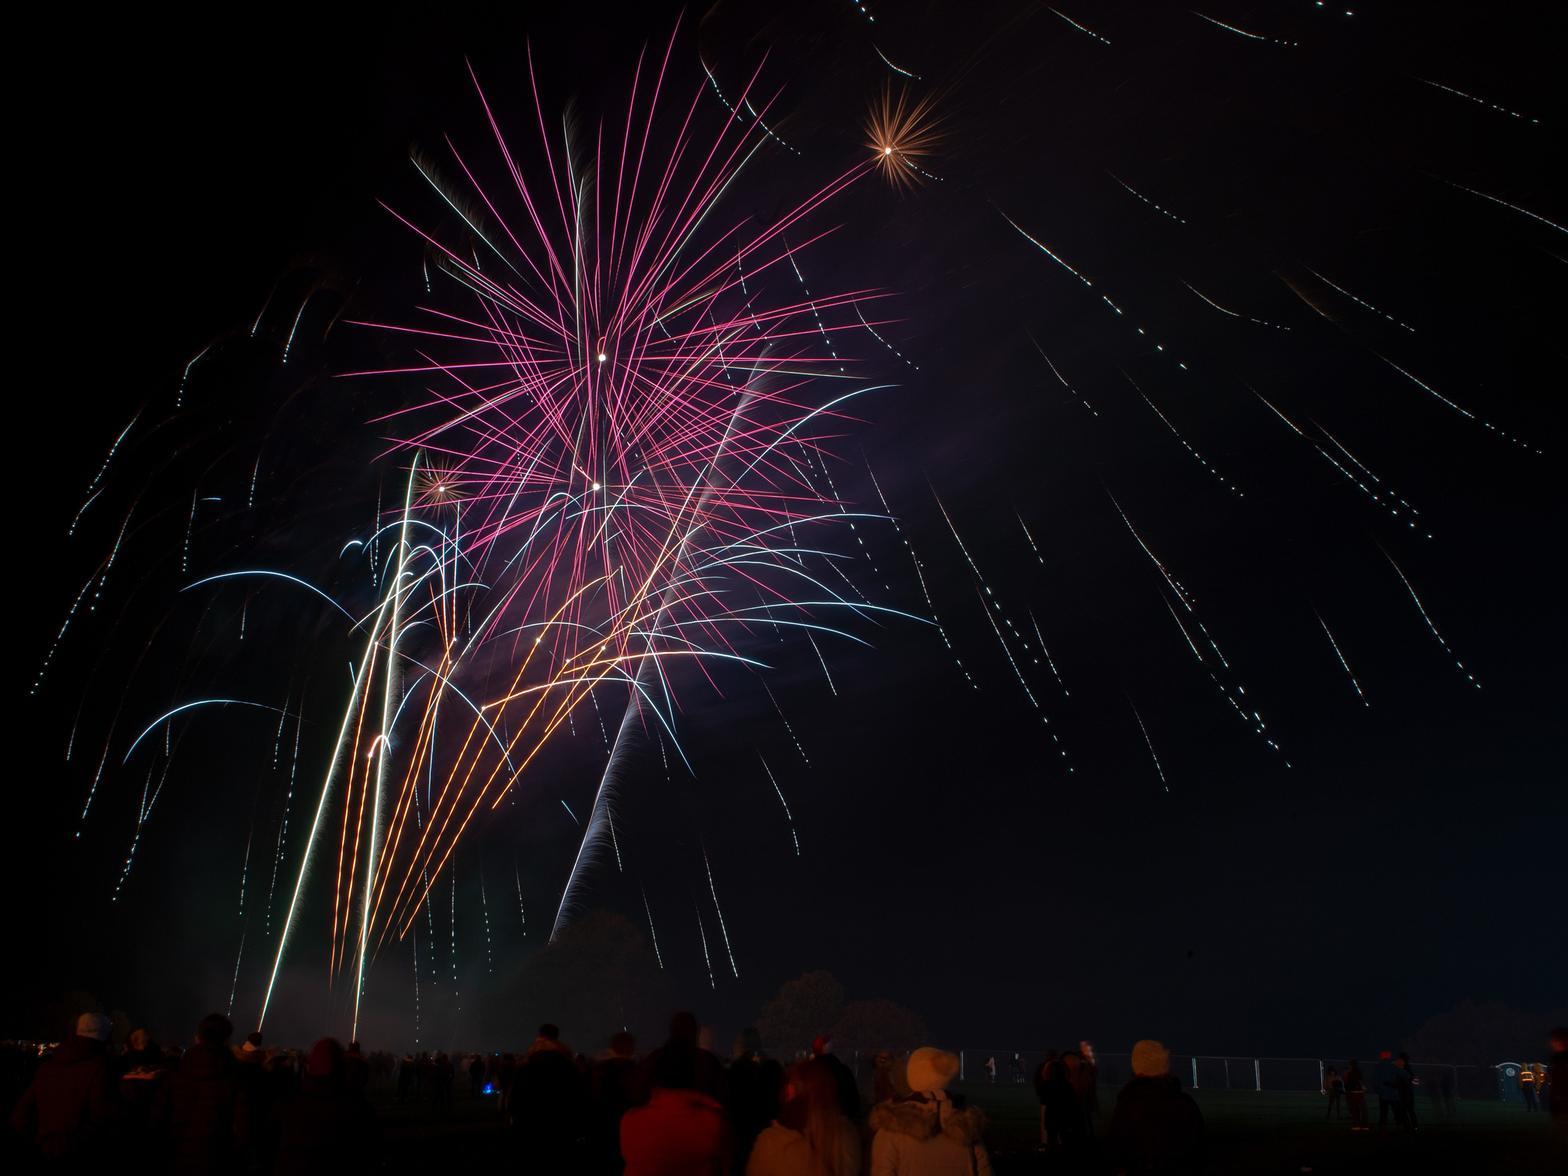 The fireworks wowed the crowds. cc Bruce Rollinson